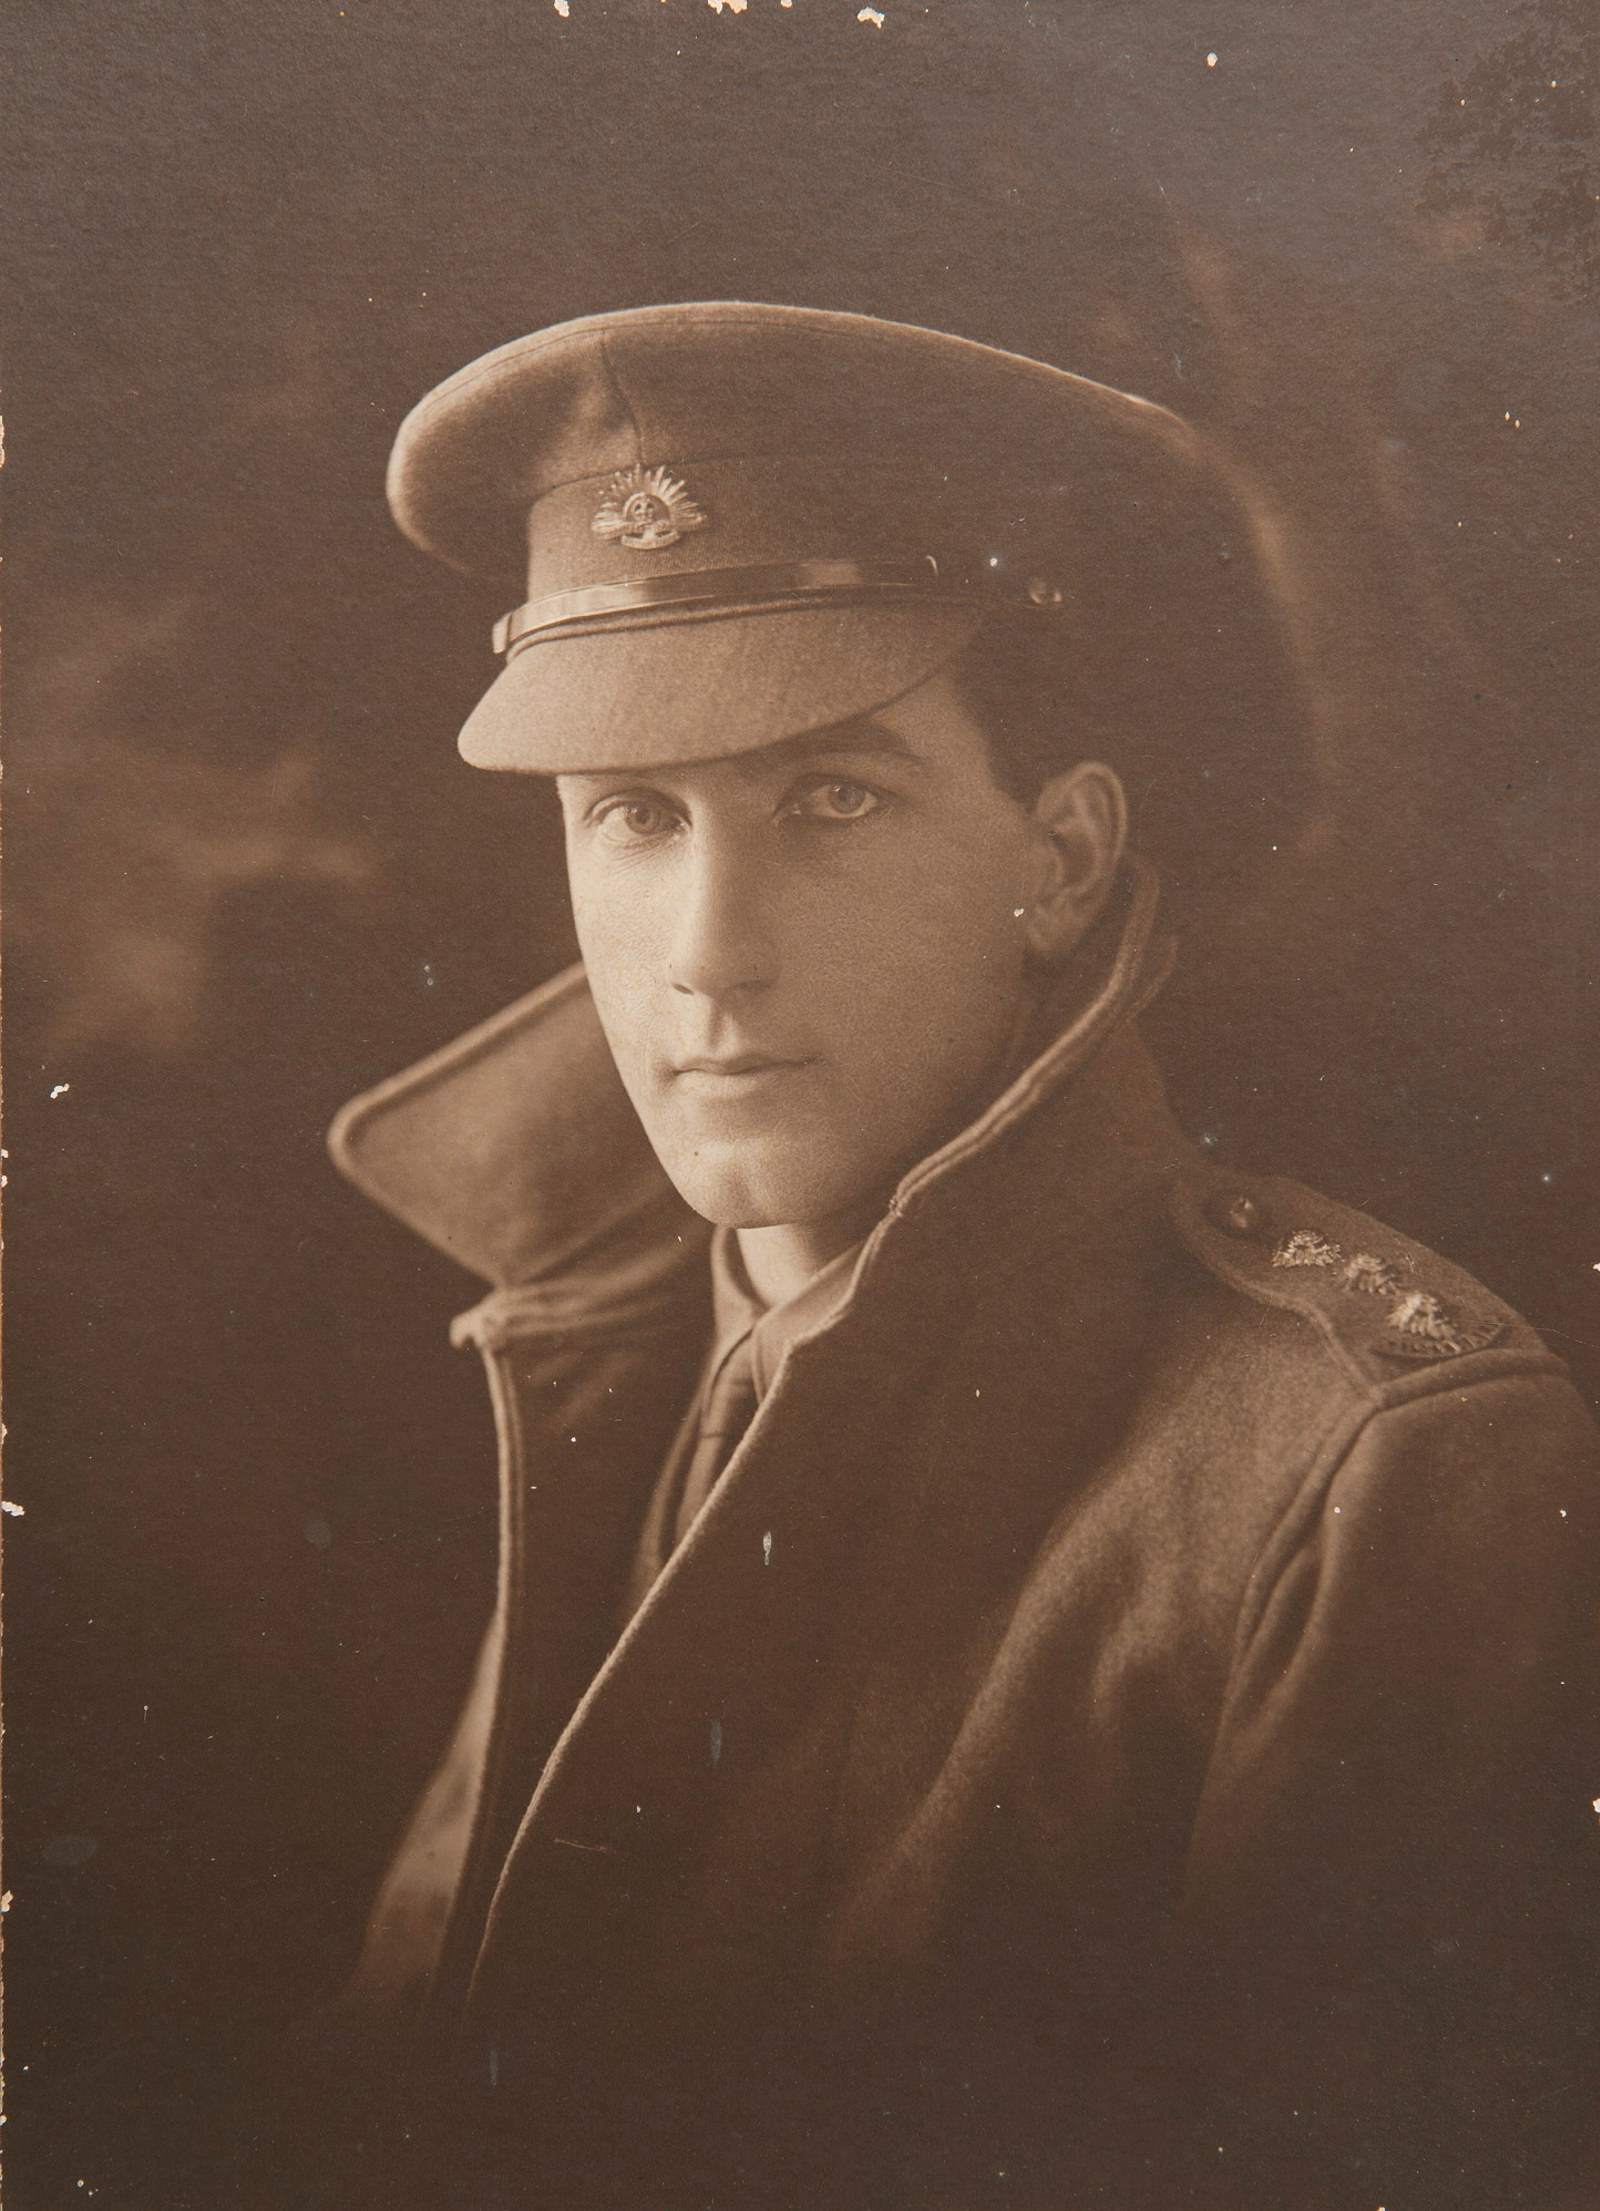 Photo of man in army uniform with coat collar turned up and cap.